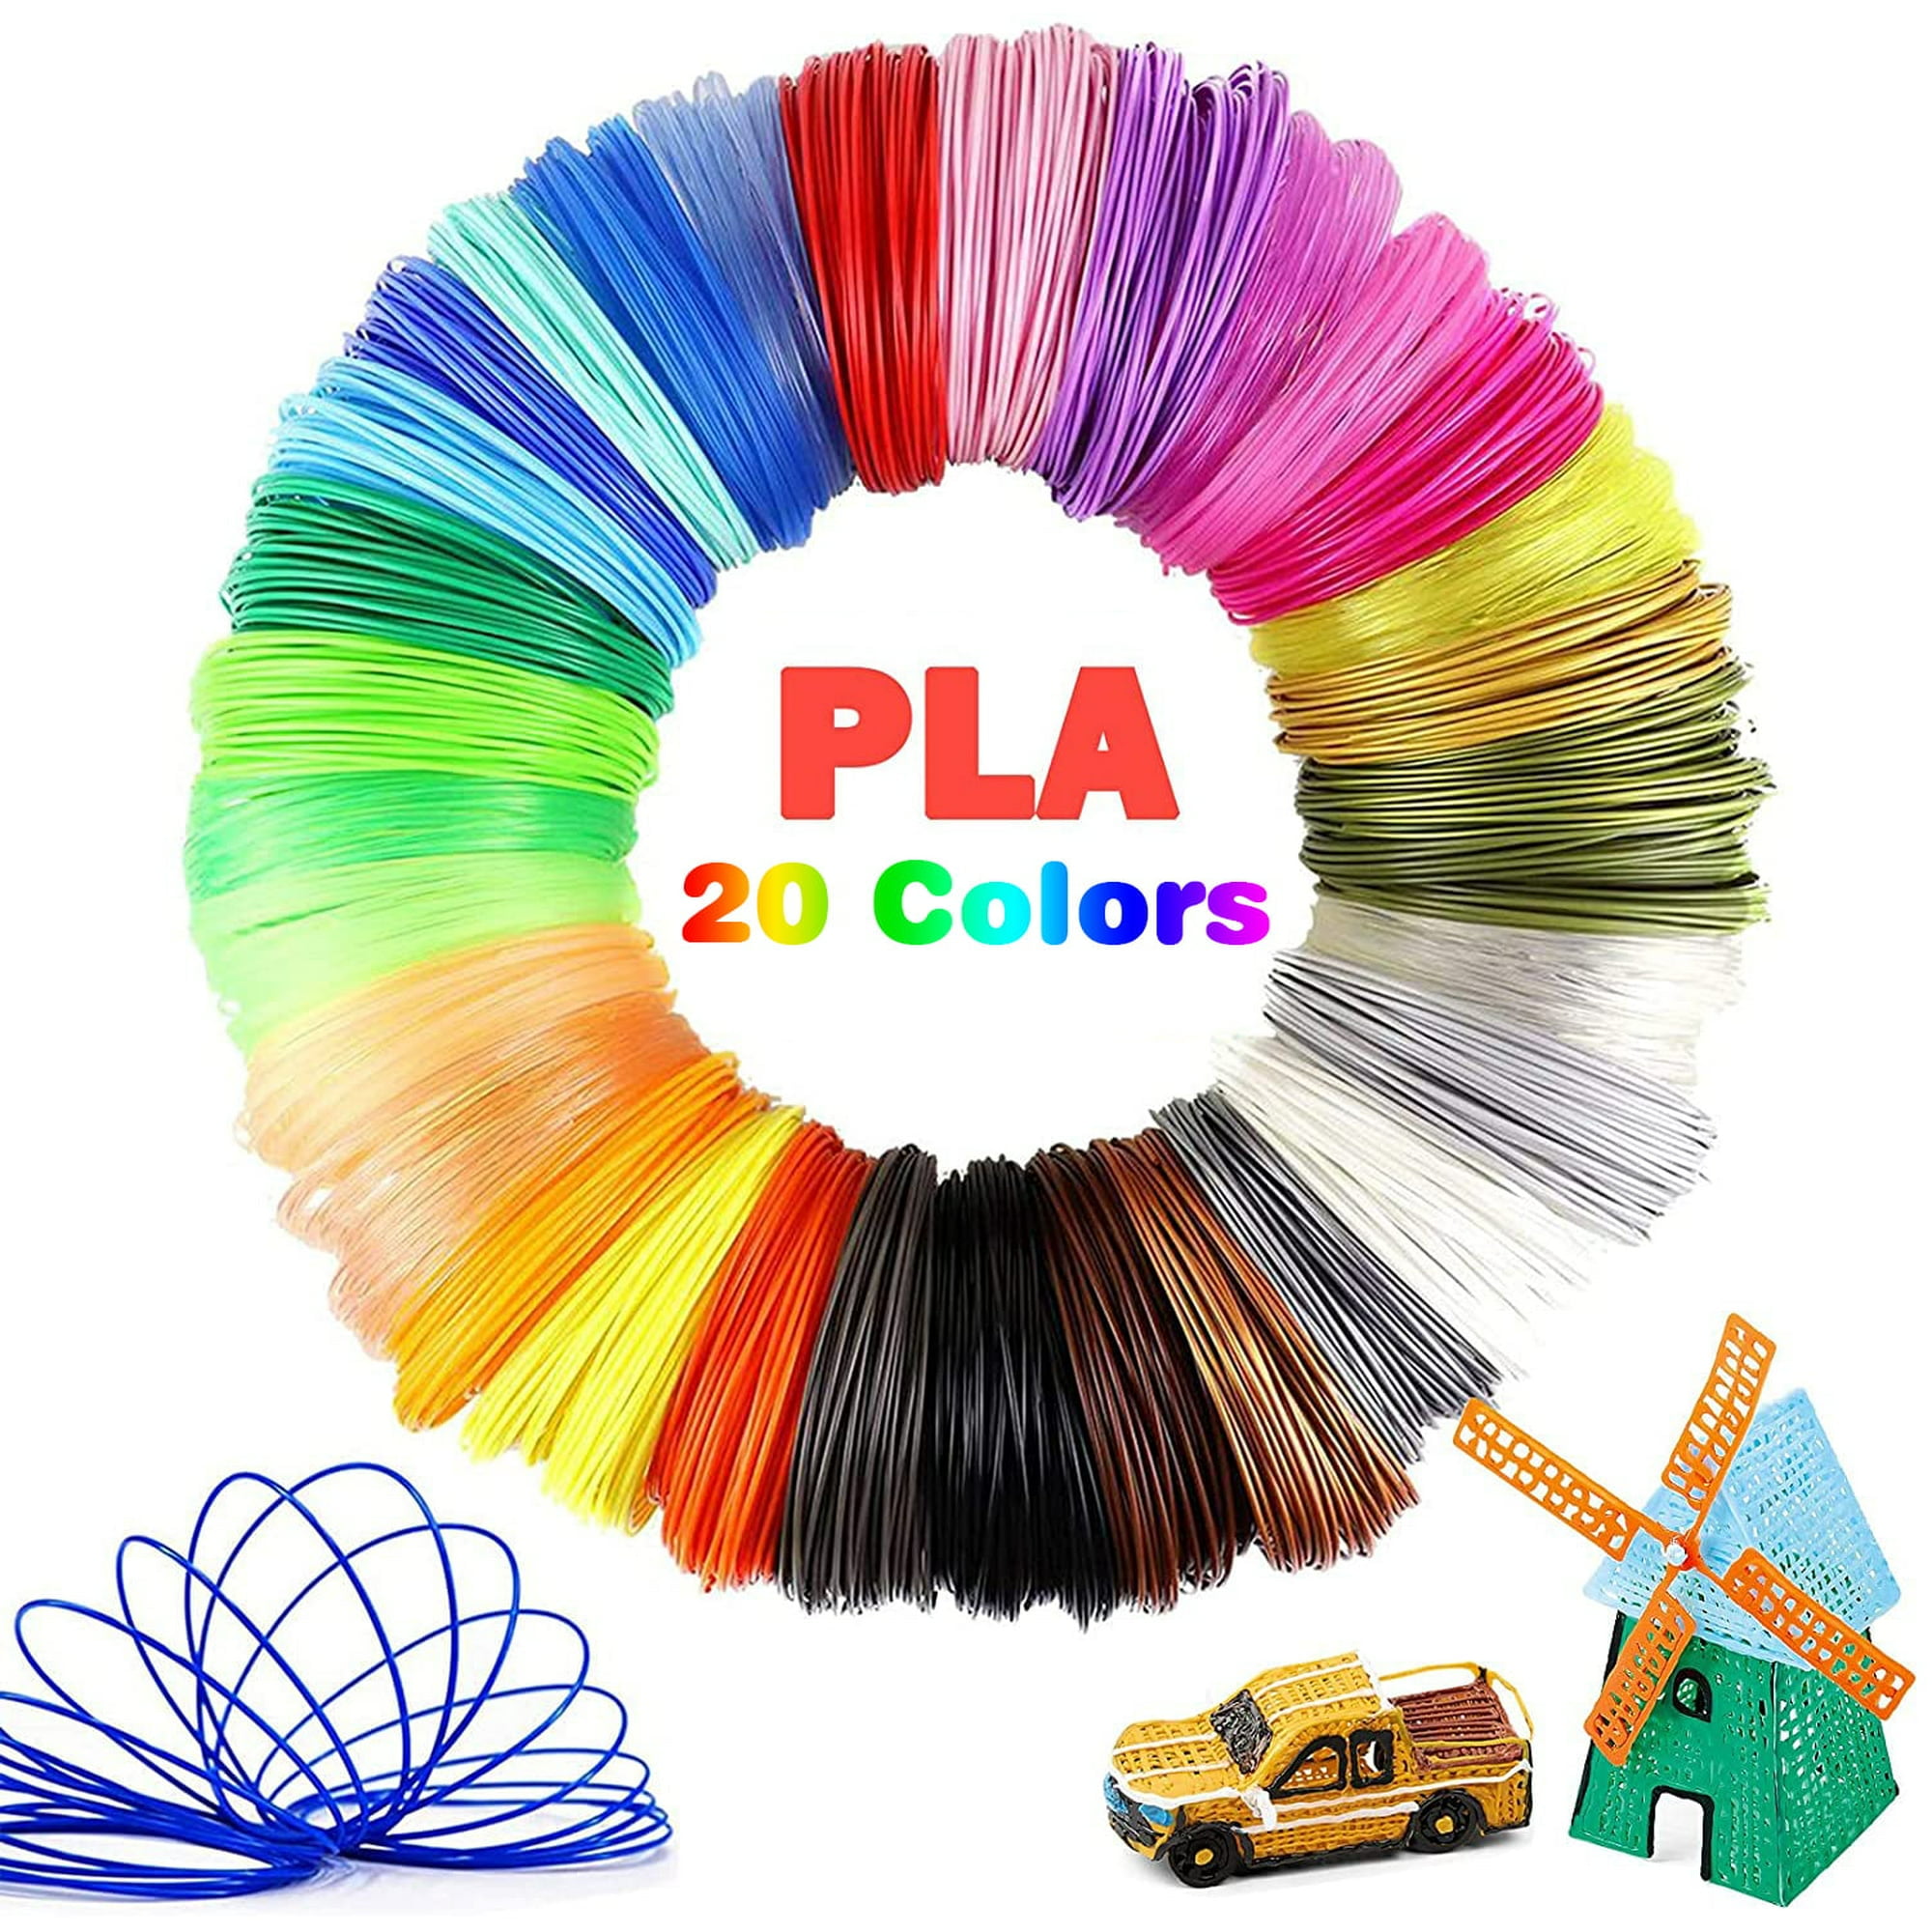 3D Pen for Kids 3D Printing Pen 3D Crayon 3D Art Pen with 10 Colors  Filaments 3D Drawing Craft Pen Holiday Christmas Toys/Gifts